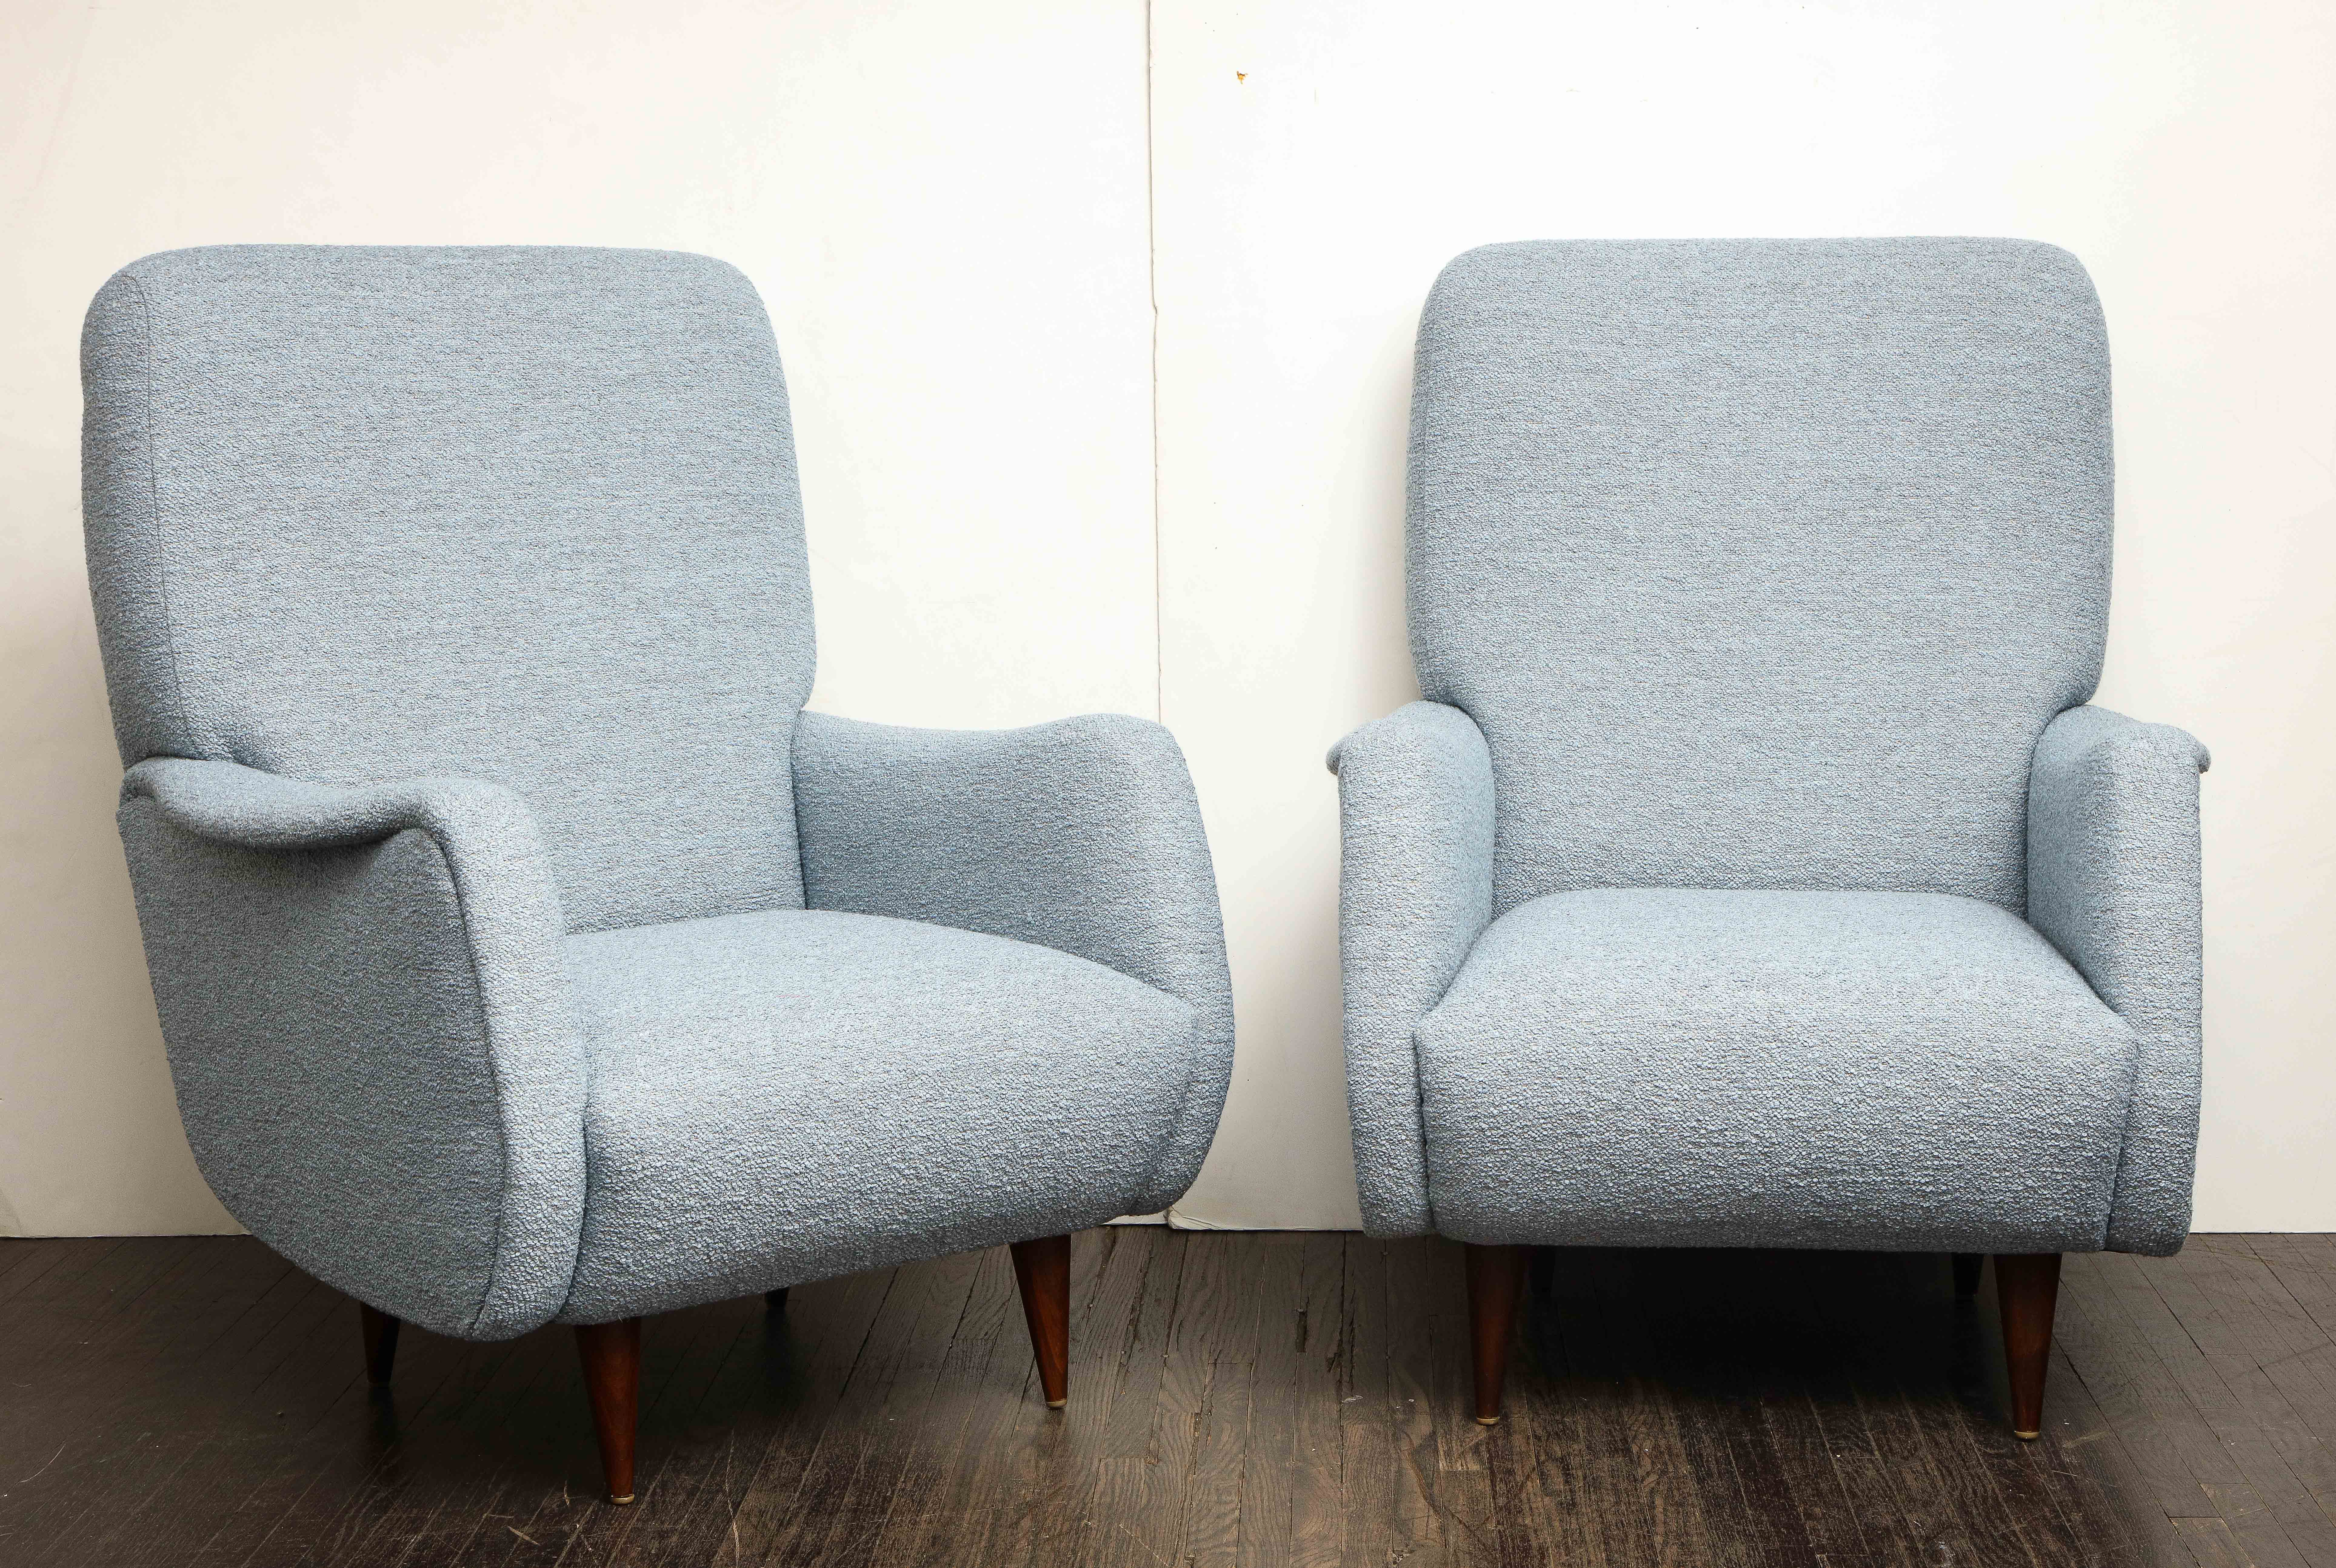 Pair of vintage Italian armchairs in light blue boucle fabric. It has a classic mid century style profile with tapered wooden legs. Reupholstered in 2021.